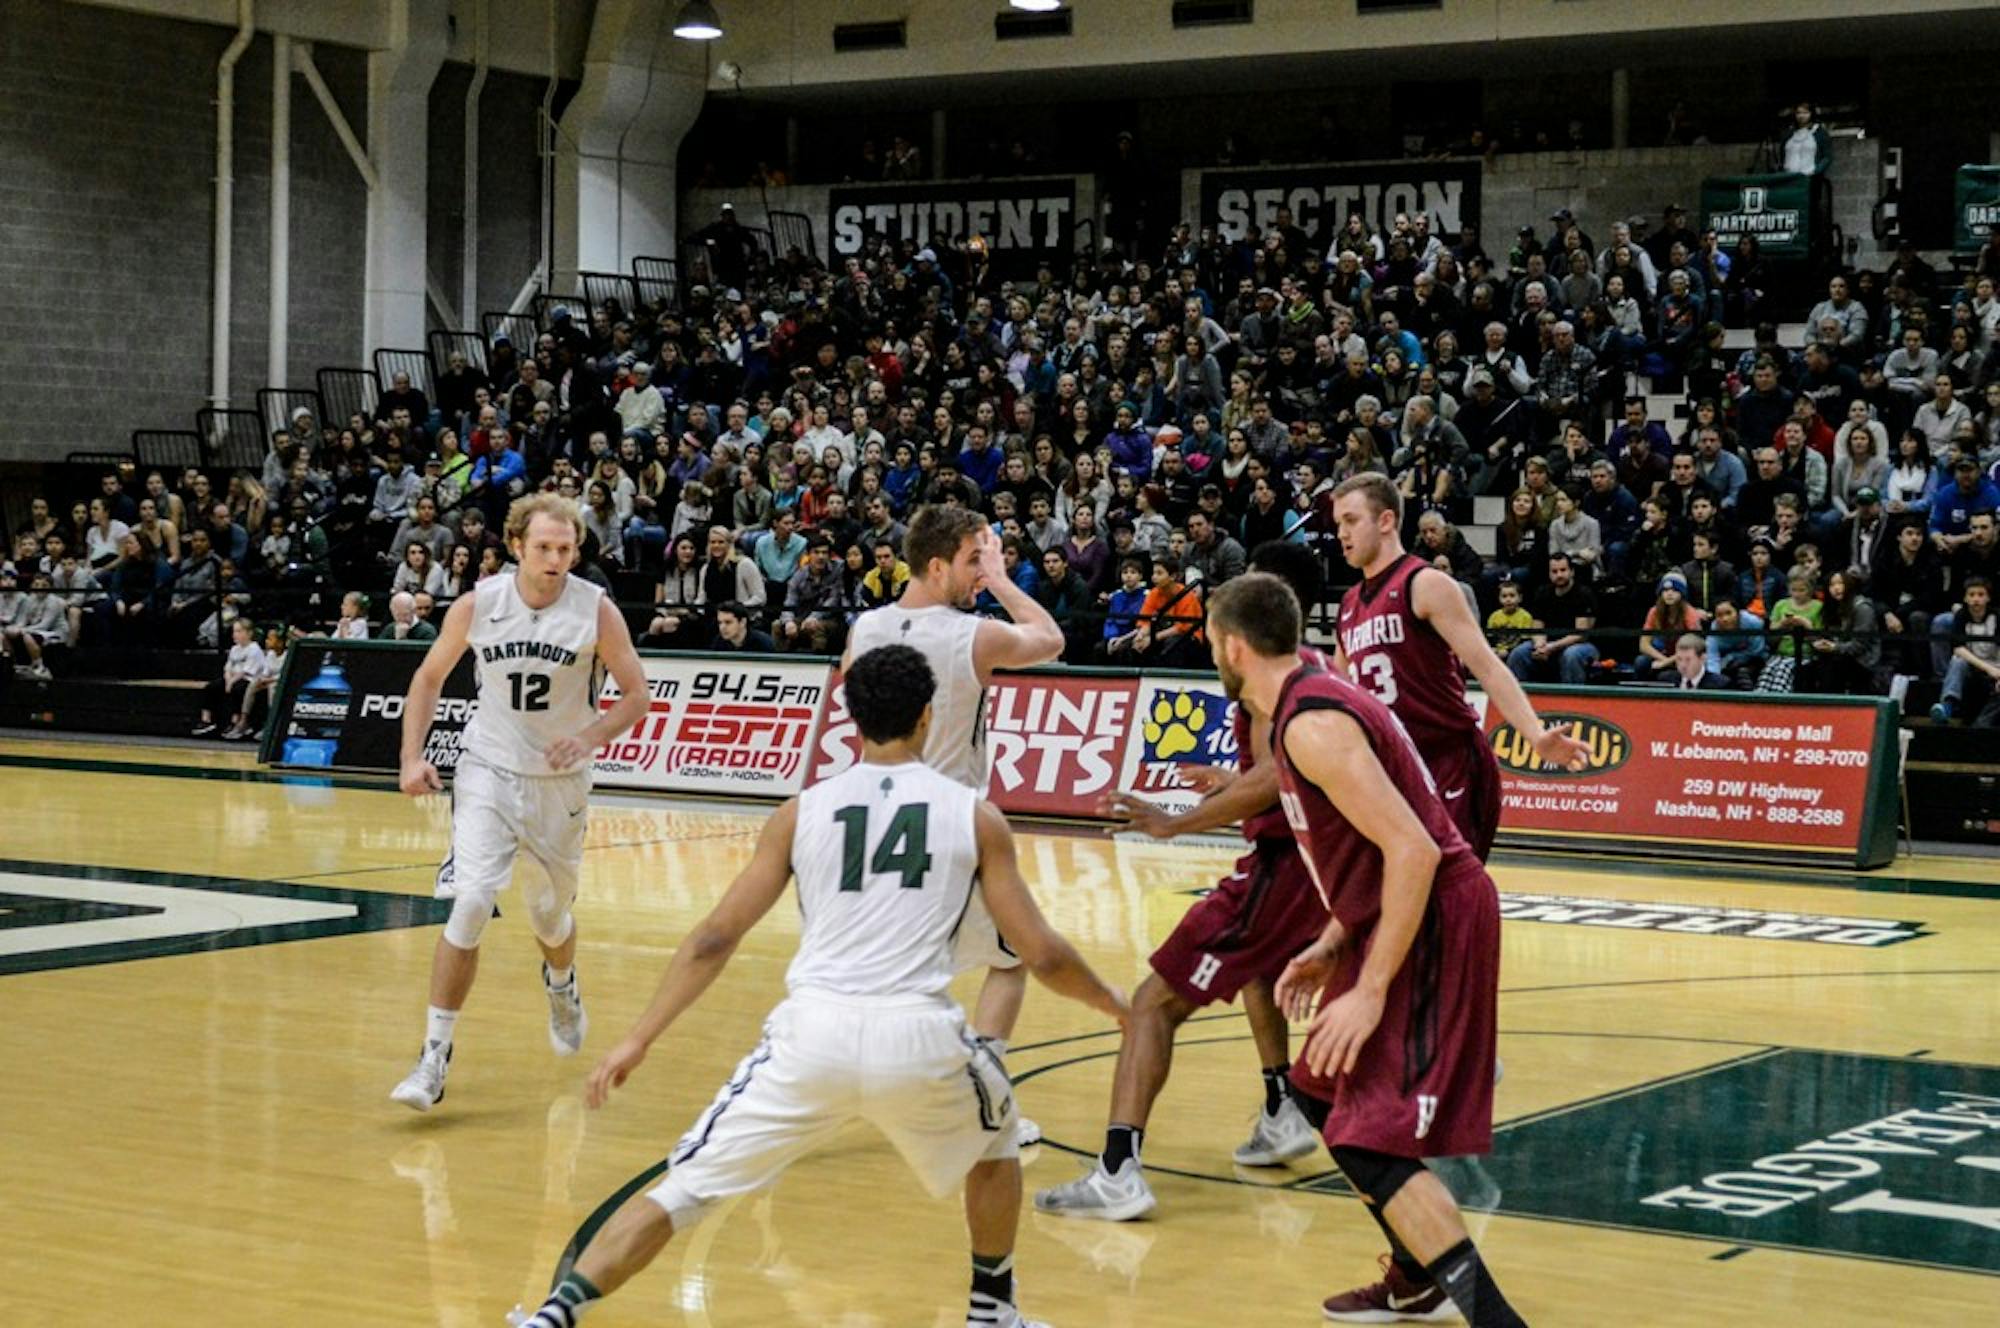 The Dartmouth men’s basketball team, currently 0-2 in the Ivy League, is vying for a spot in the postseason tournament.